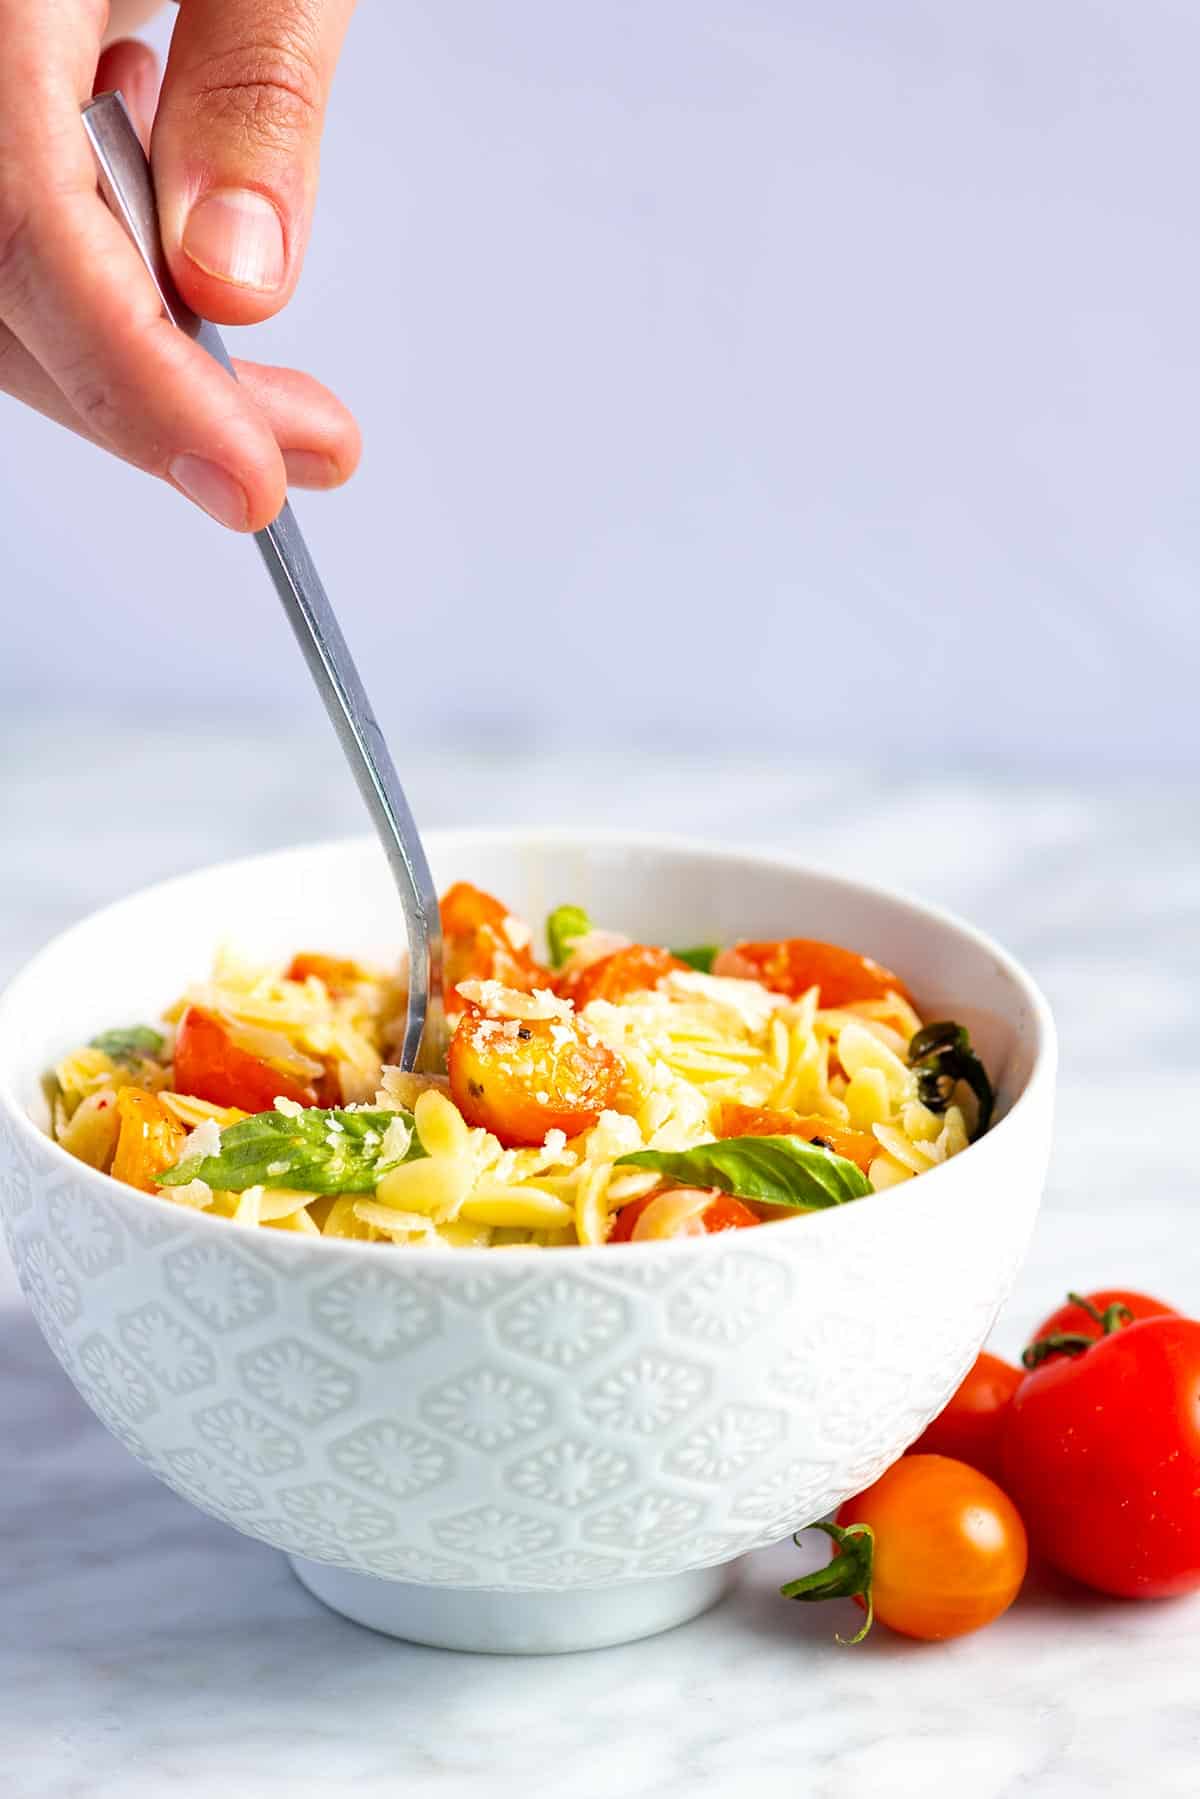 A plate of orzo pasta with tomatoes and basil